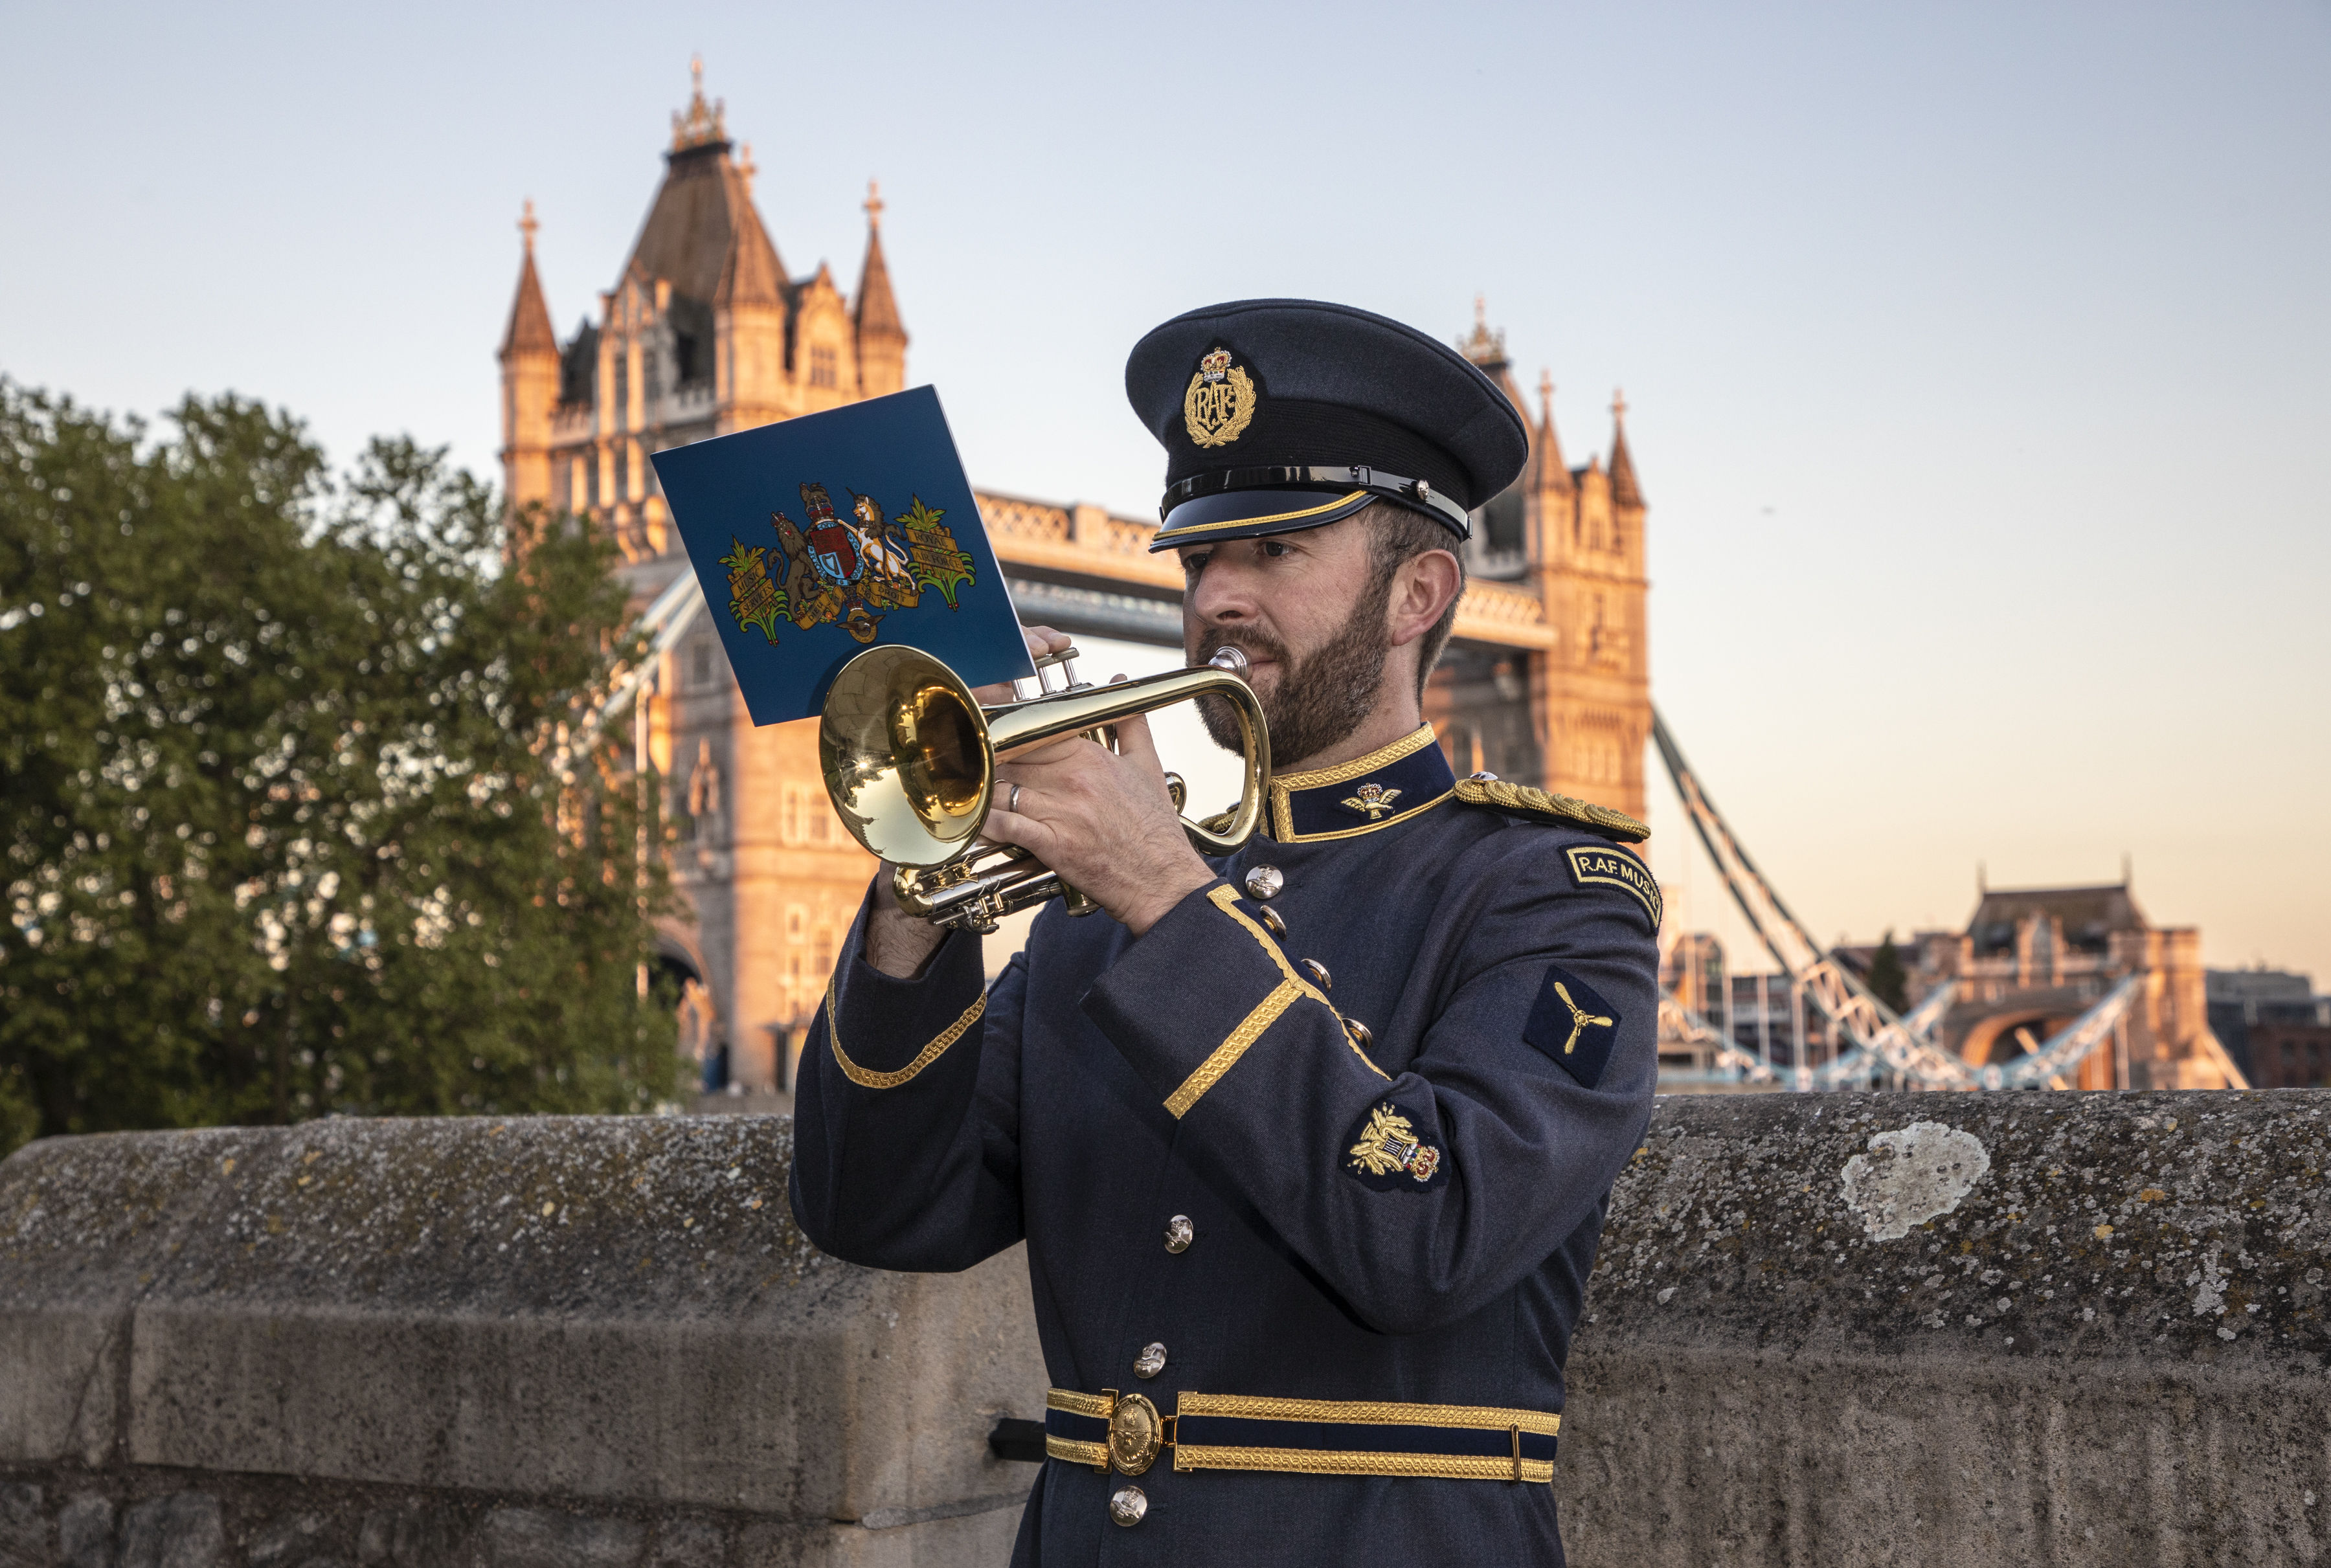 RAF trumpeter plays by the Tower of London.